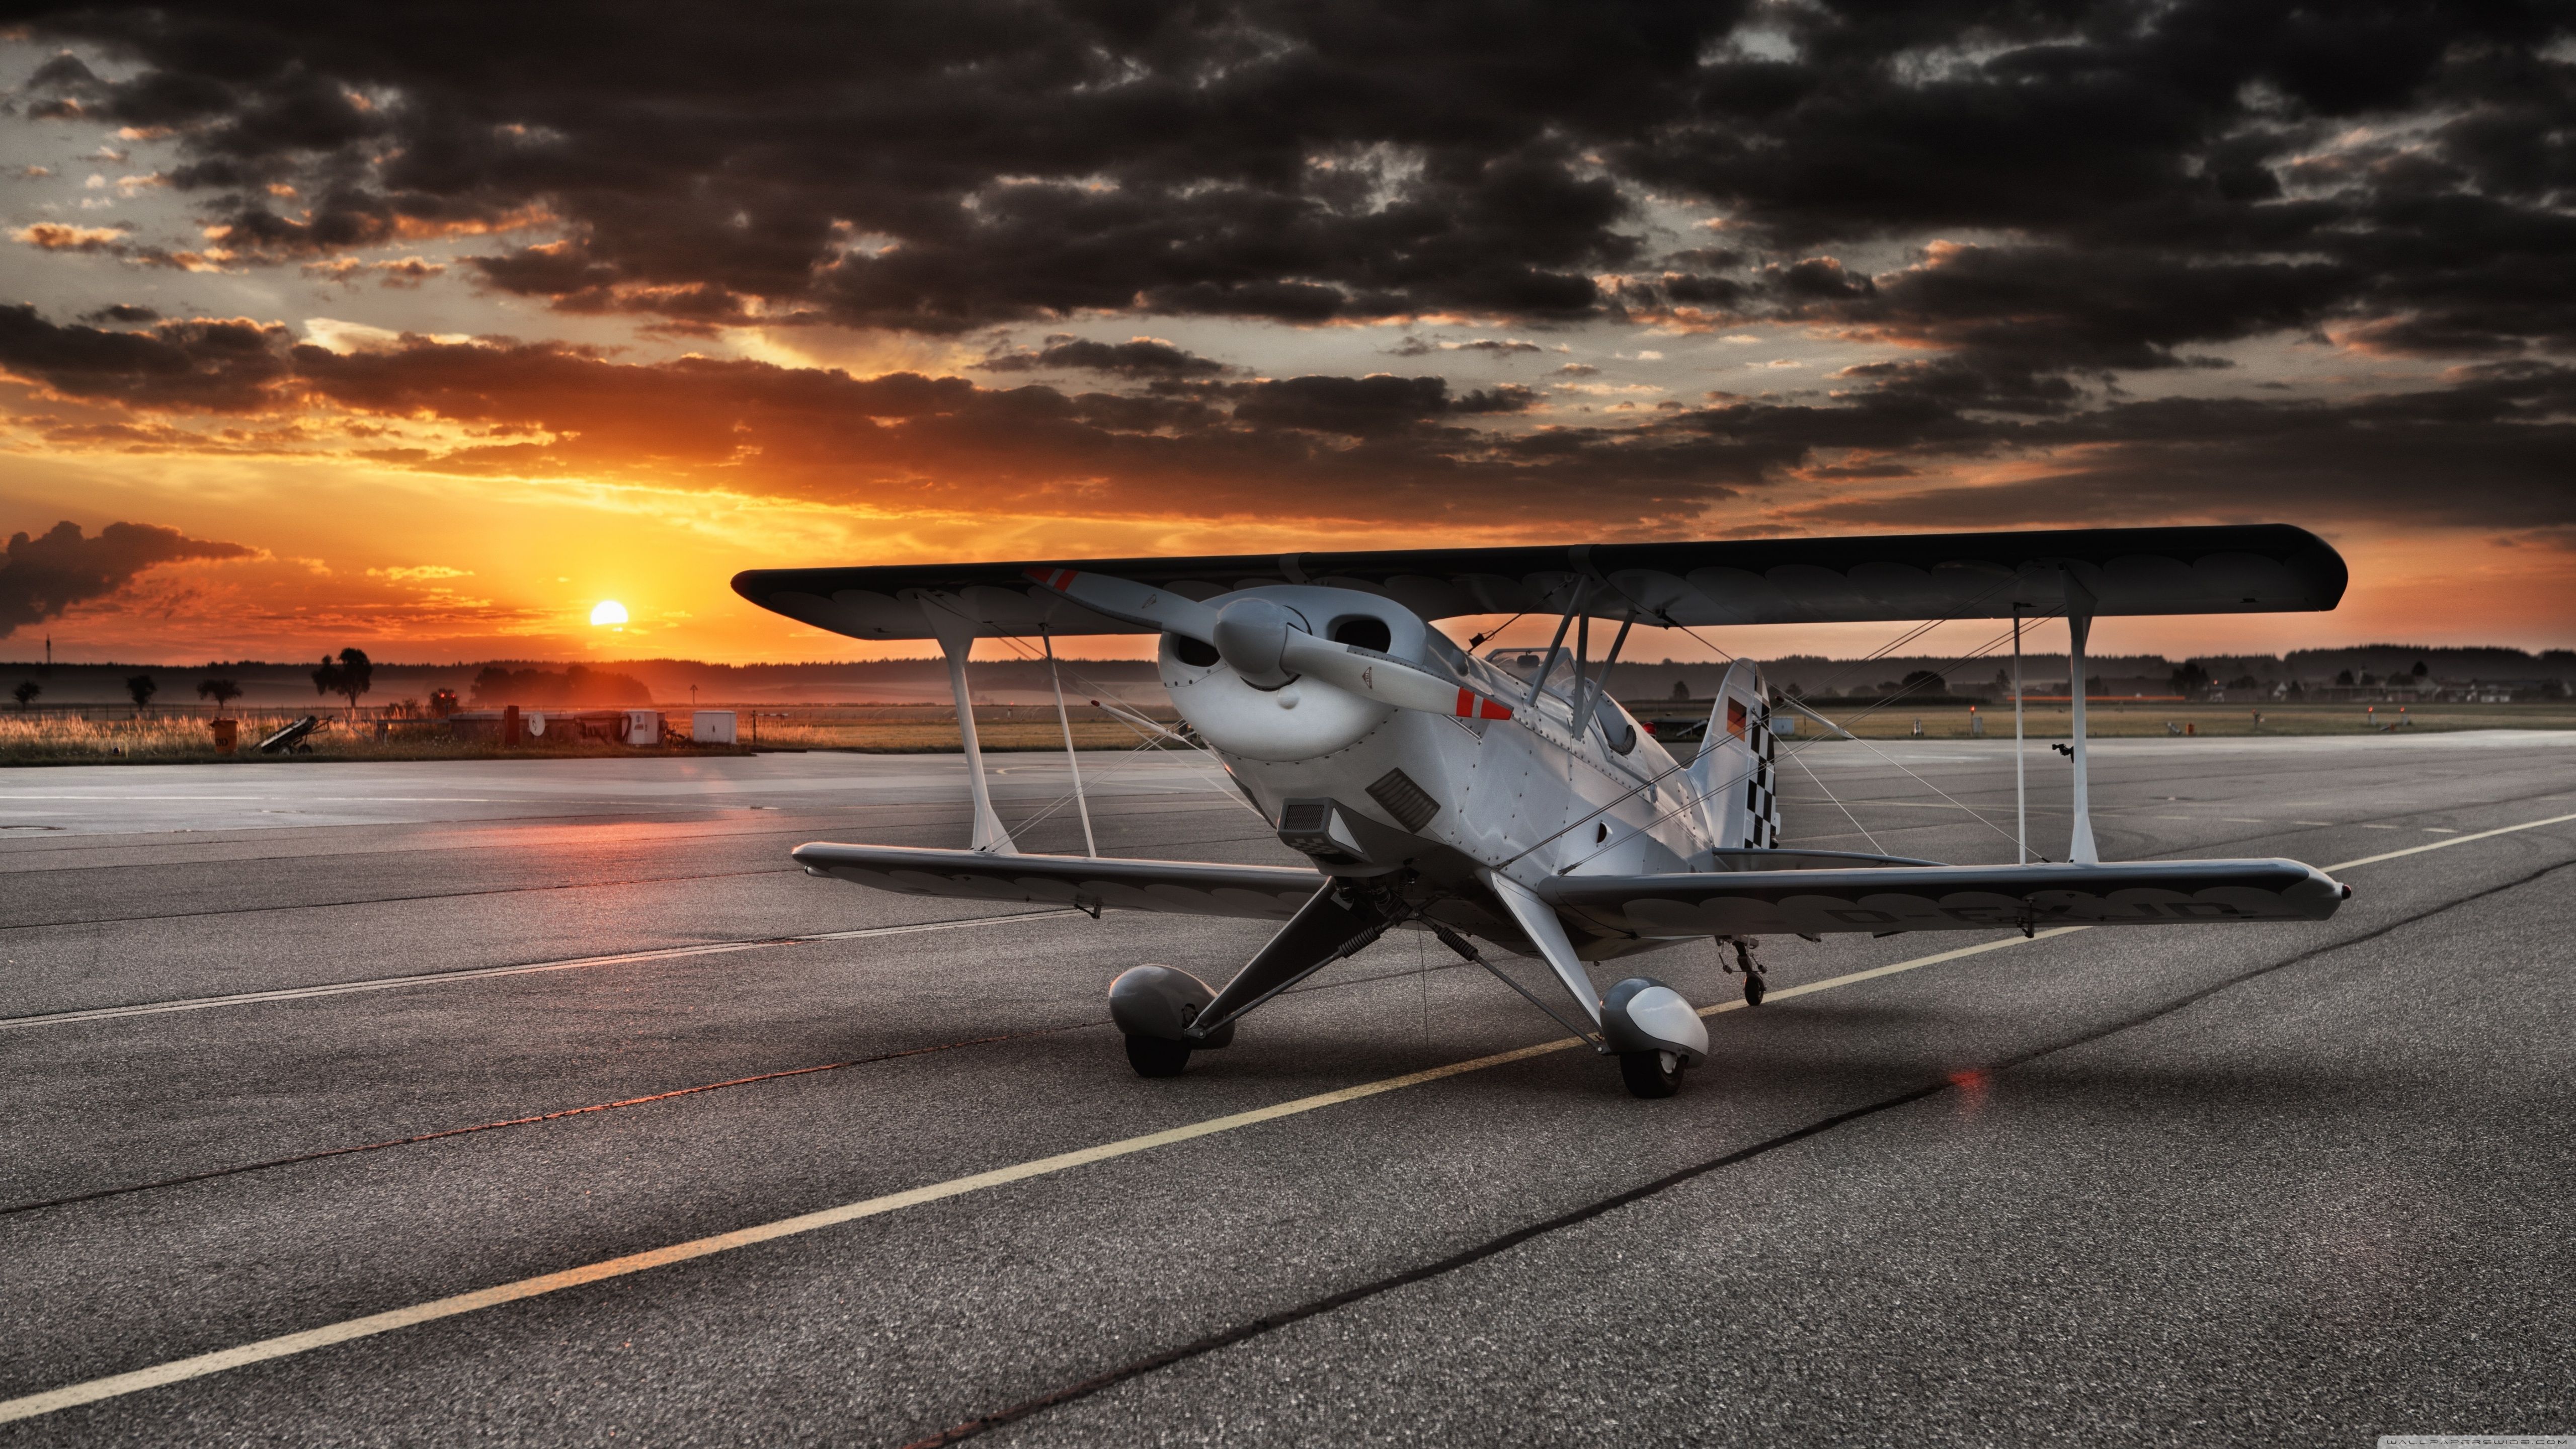 Aircraft Ultra HD Desktop Background Wallpaper for: Multi Display, Dual Monitor, Tablet